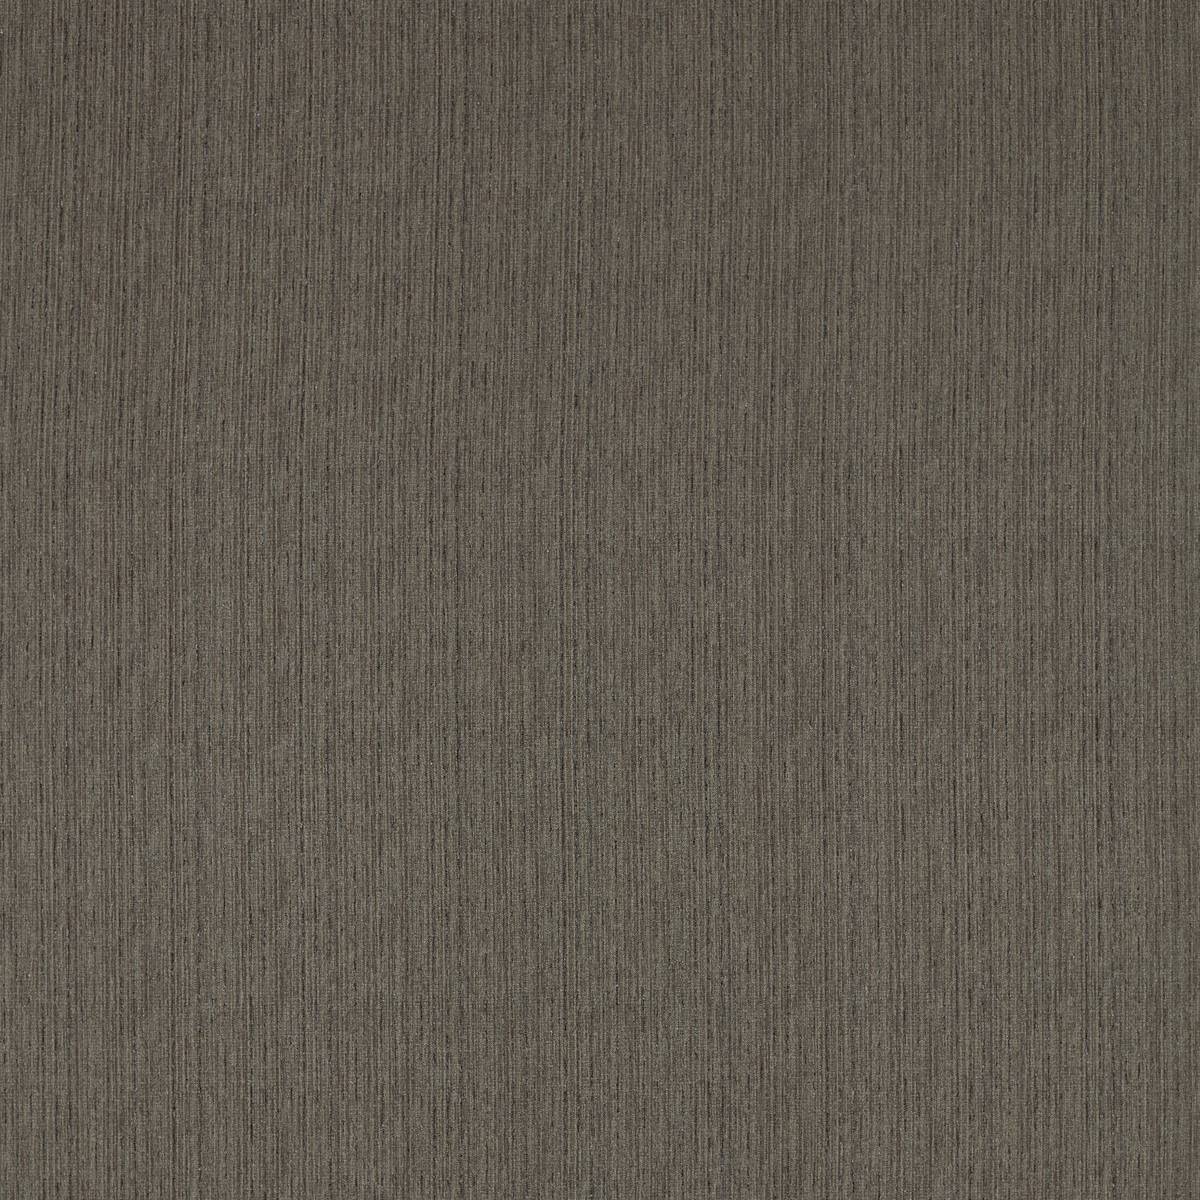 Spindlestone Charcoal Fabric by Sanderson